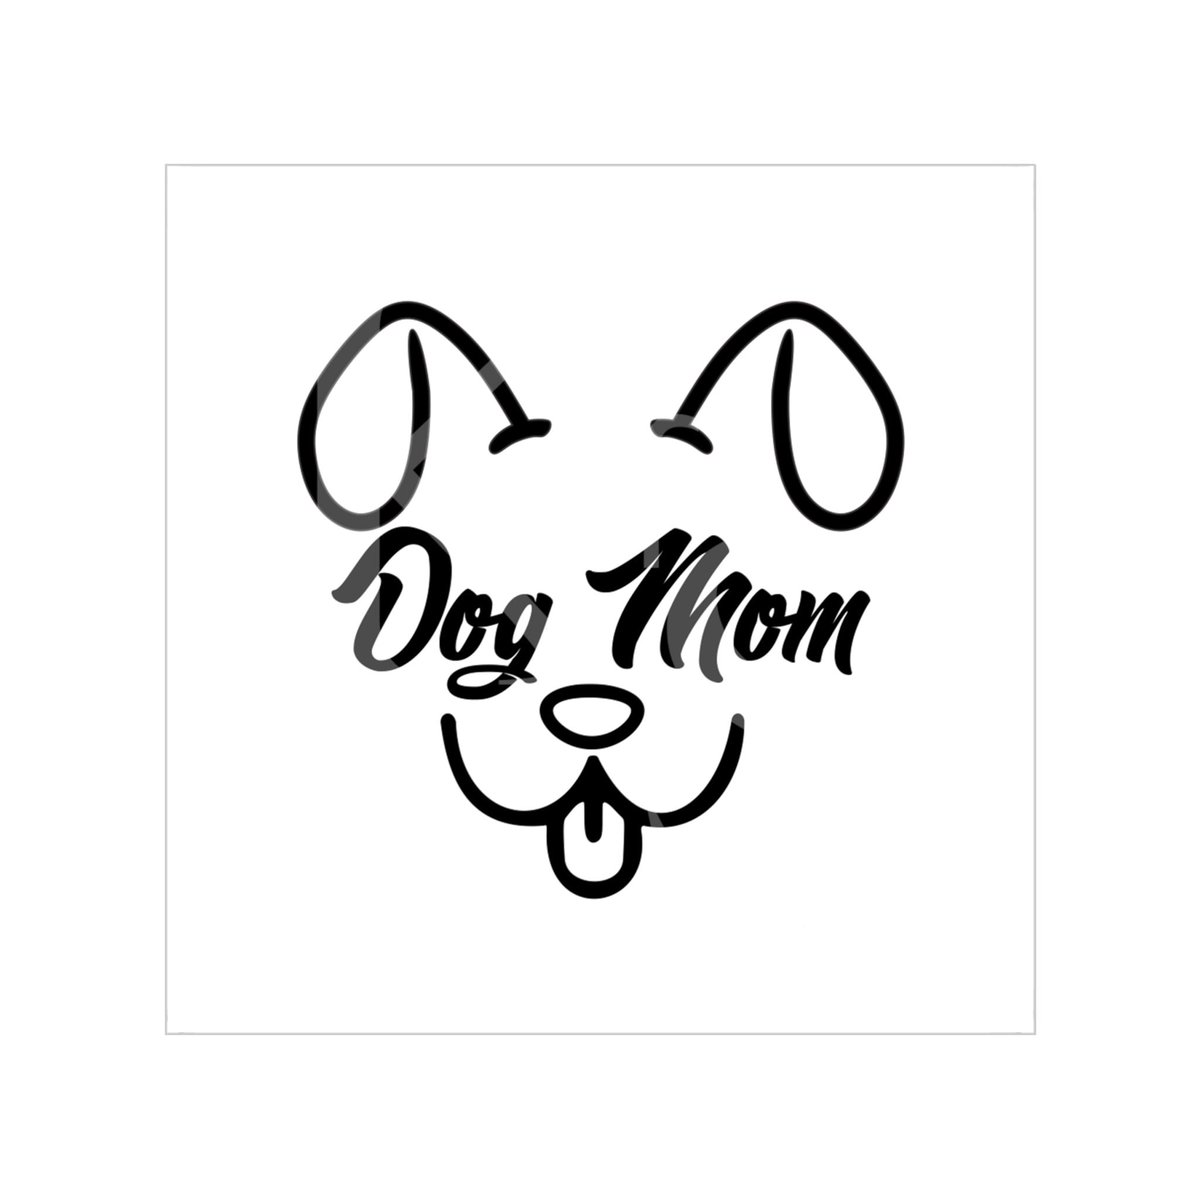 Excited to share the latest addition to my #etsy shop: Dog Mom Transparent Outdoor Stickers, Square, 1pc etsy.me/42o1ojg #dogmomsticker #forher #gift #doglover #dogloverssticker #sticker #transparentsticker #carsticker #dogmom